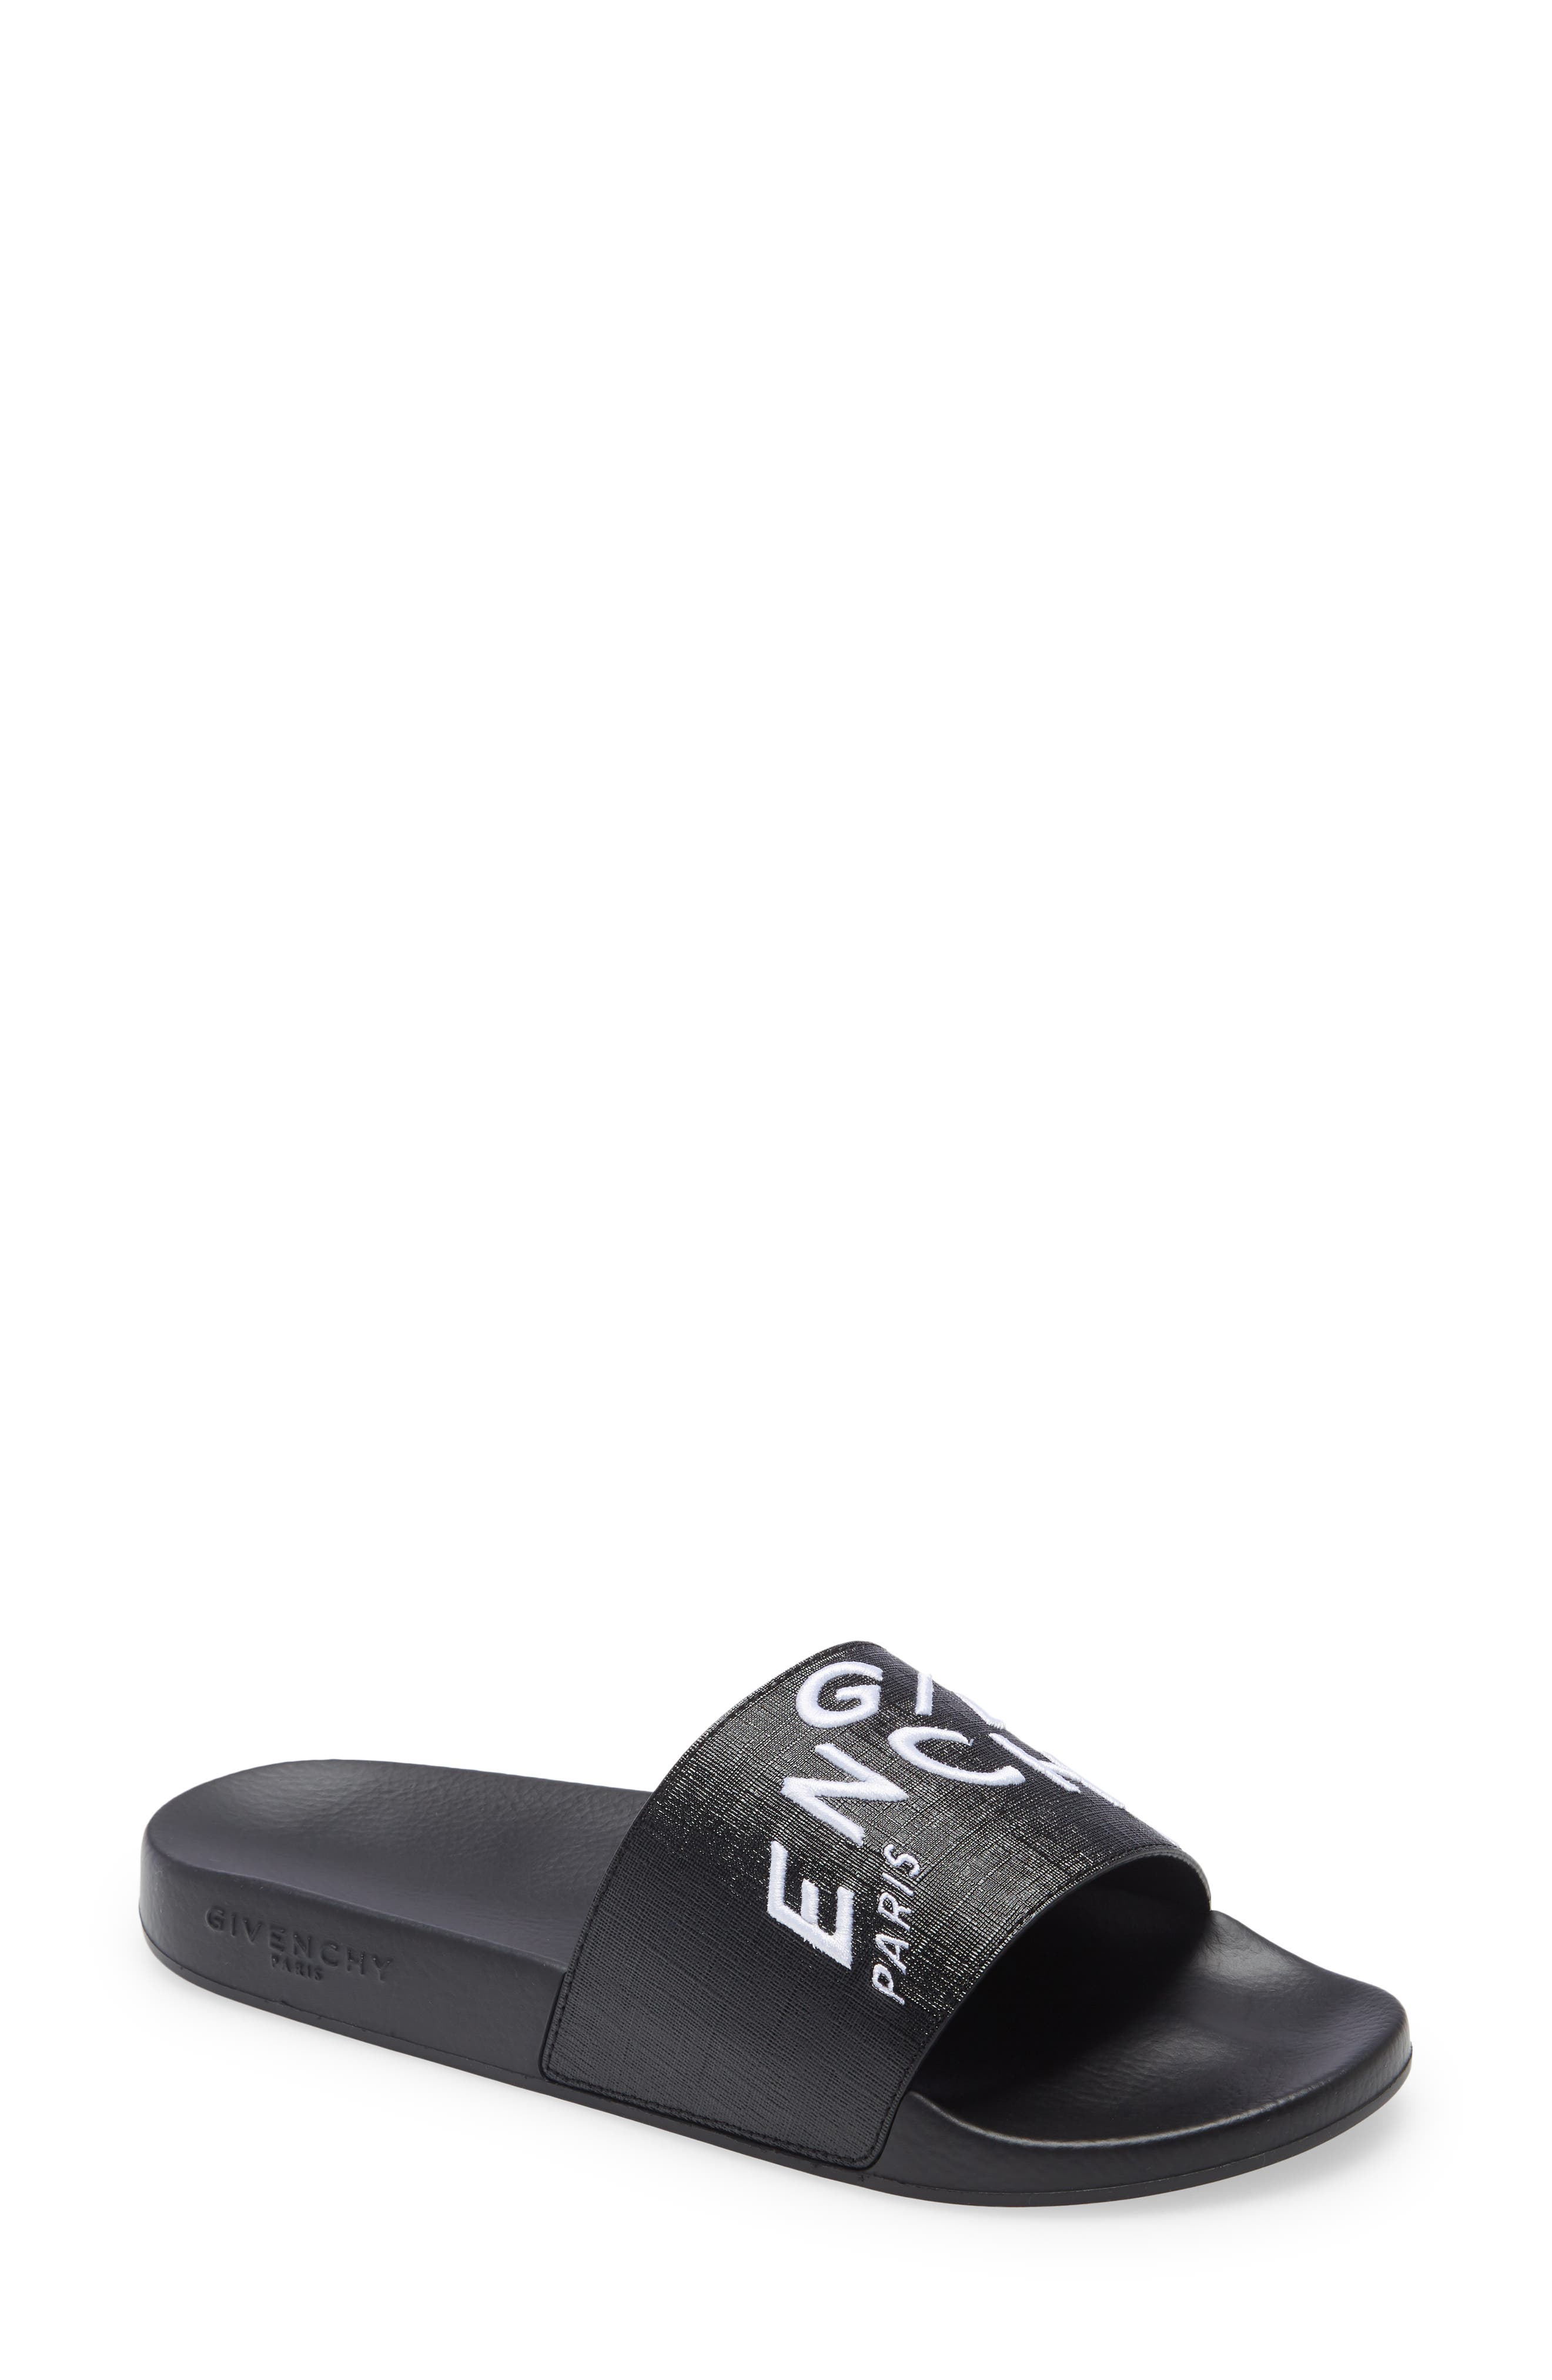 mens givenchy sandals